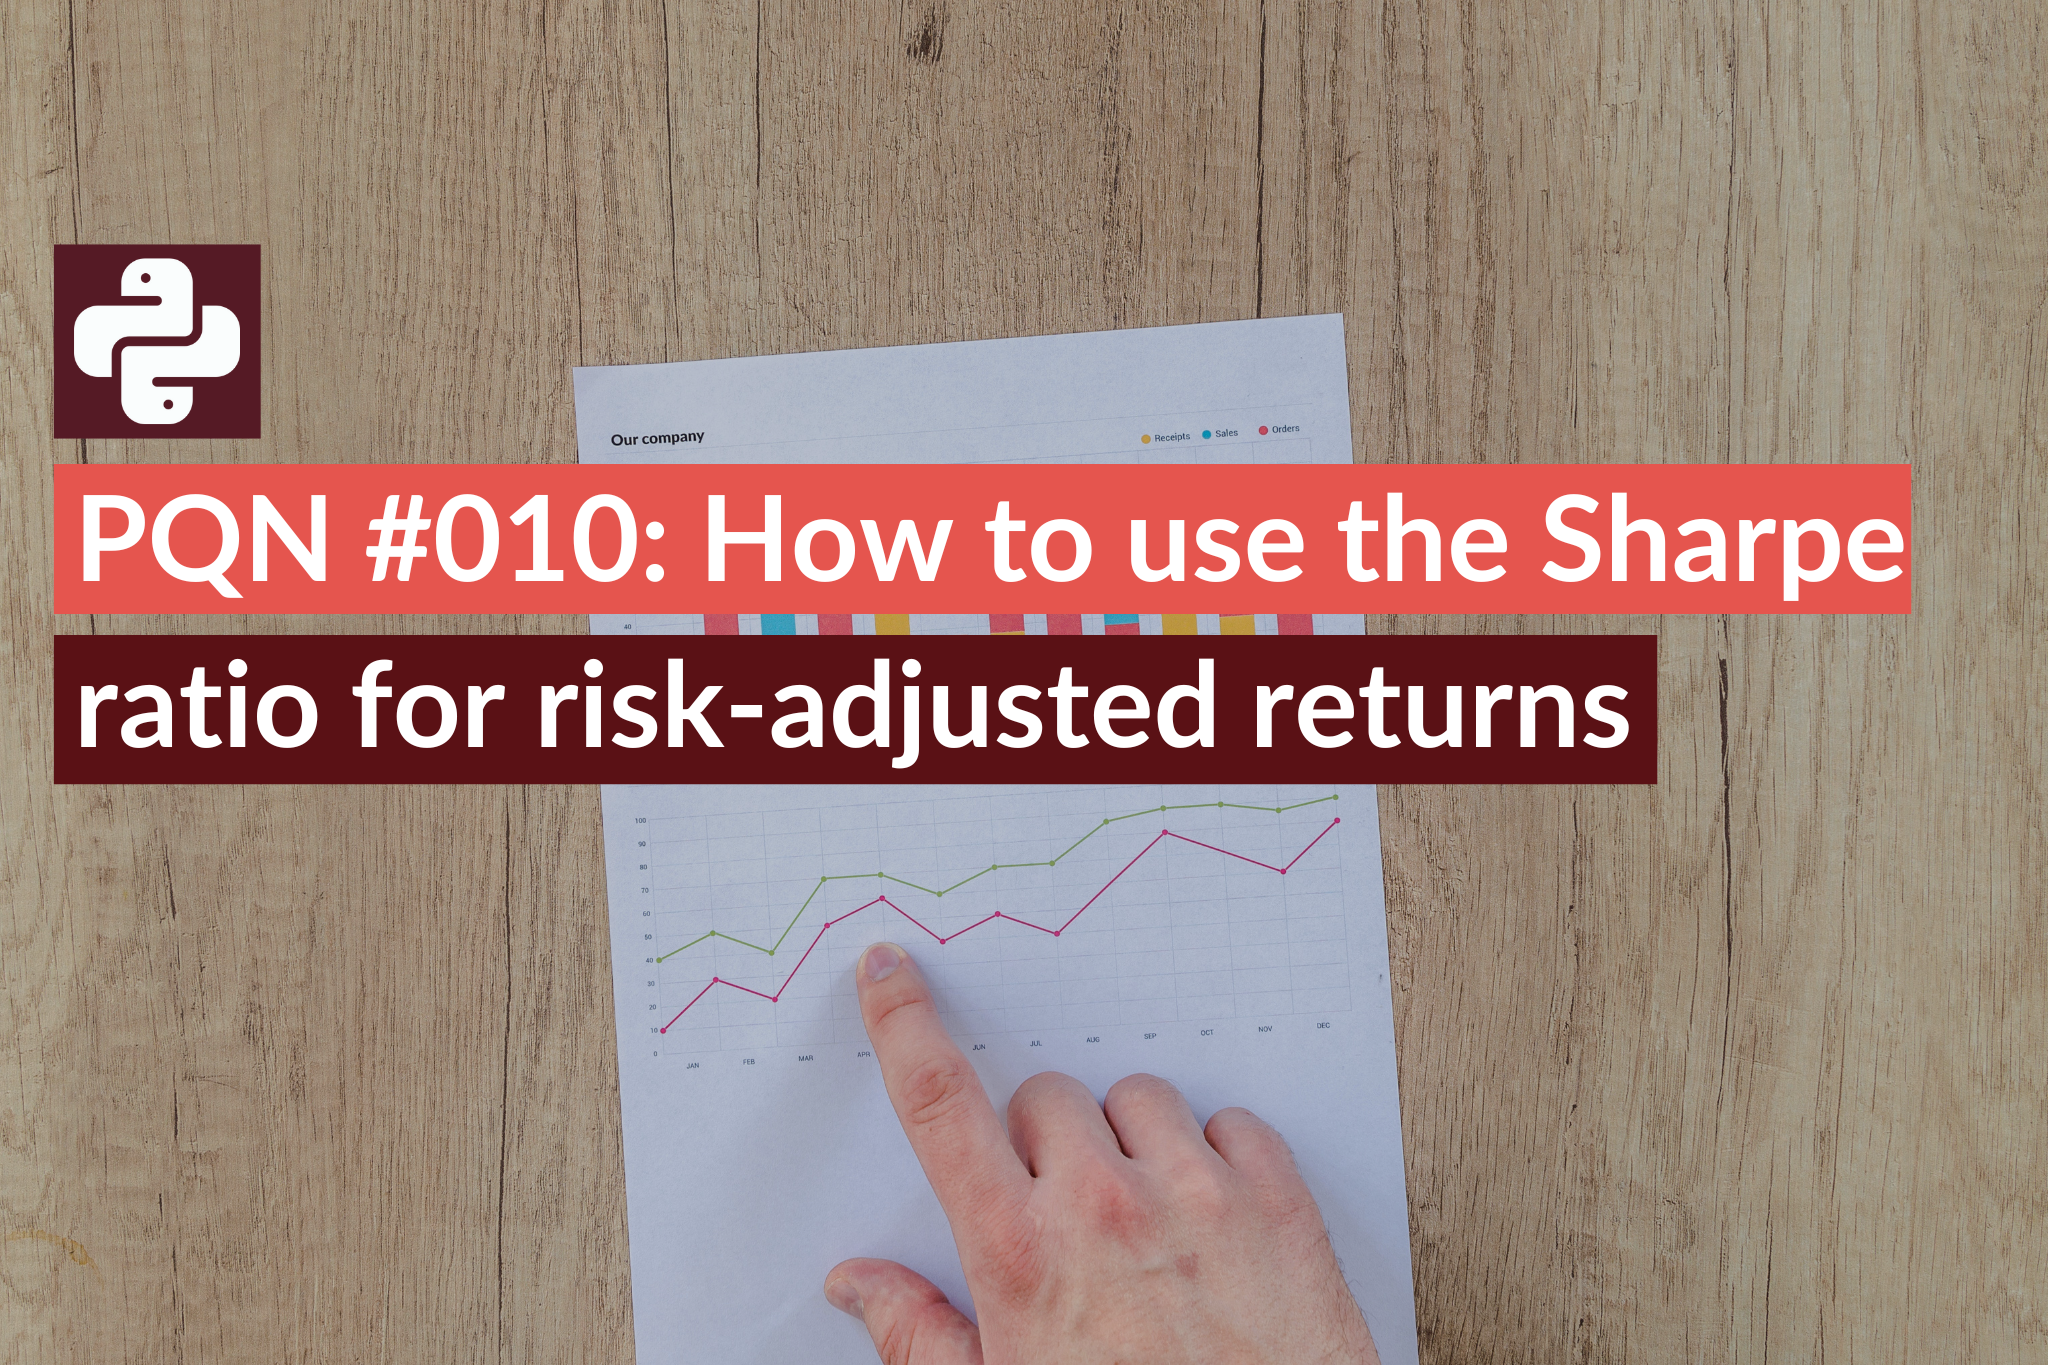 PQN #010 How to use the Sharpe ratio for risk-adjusted returns